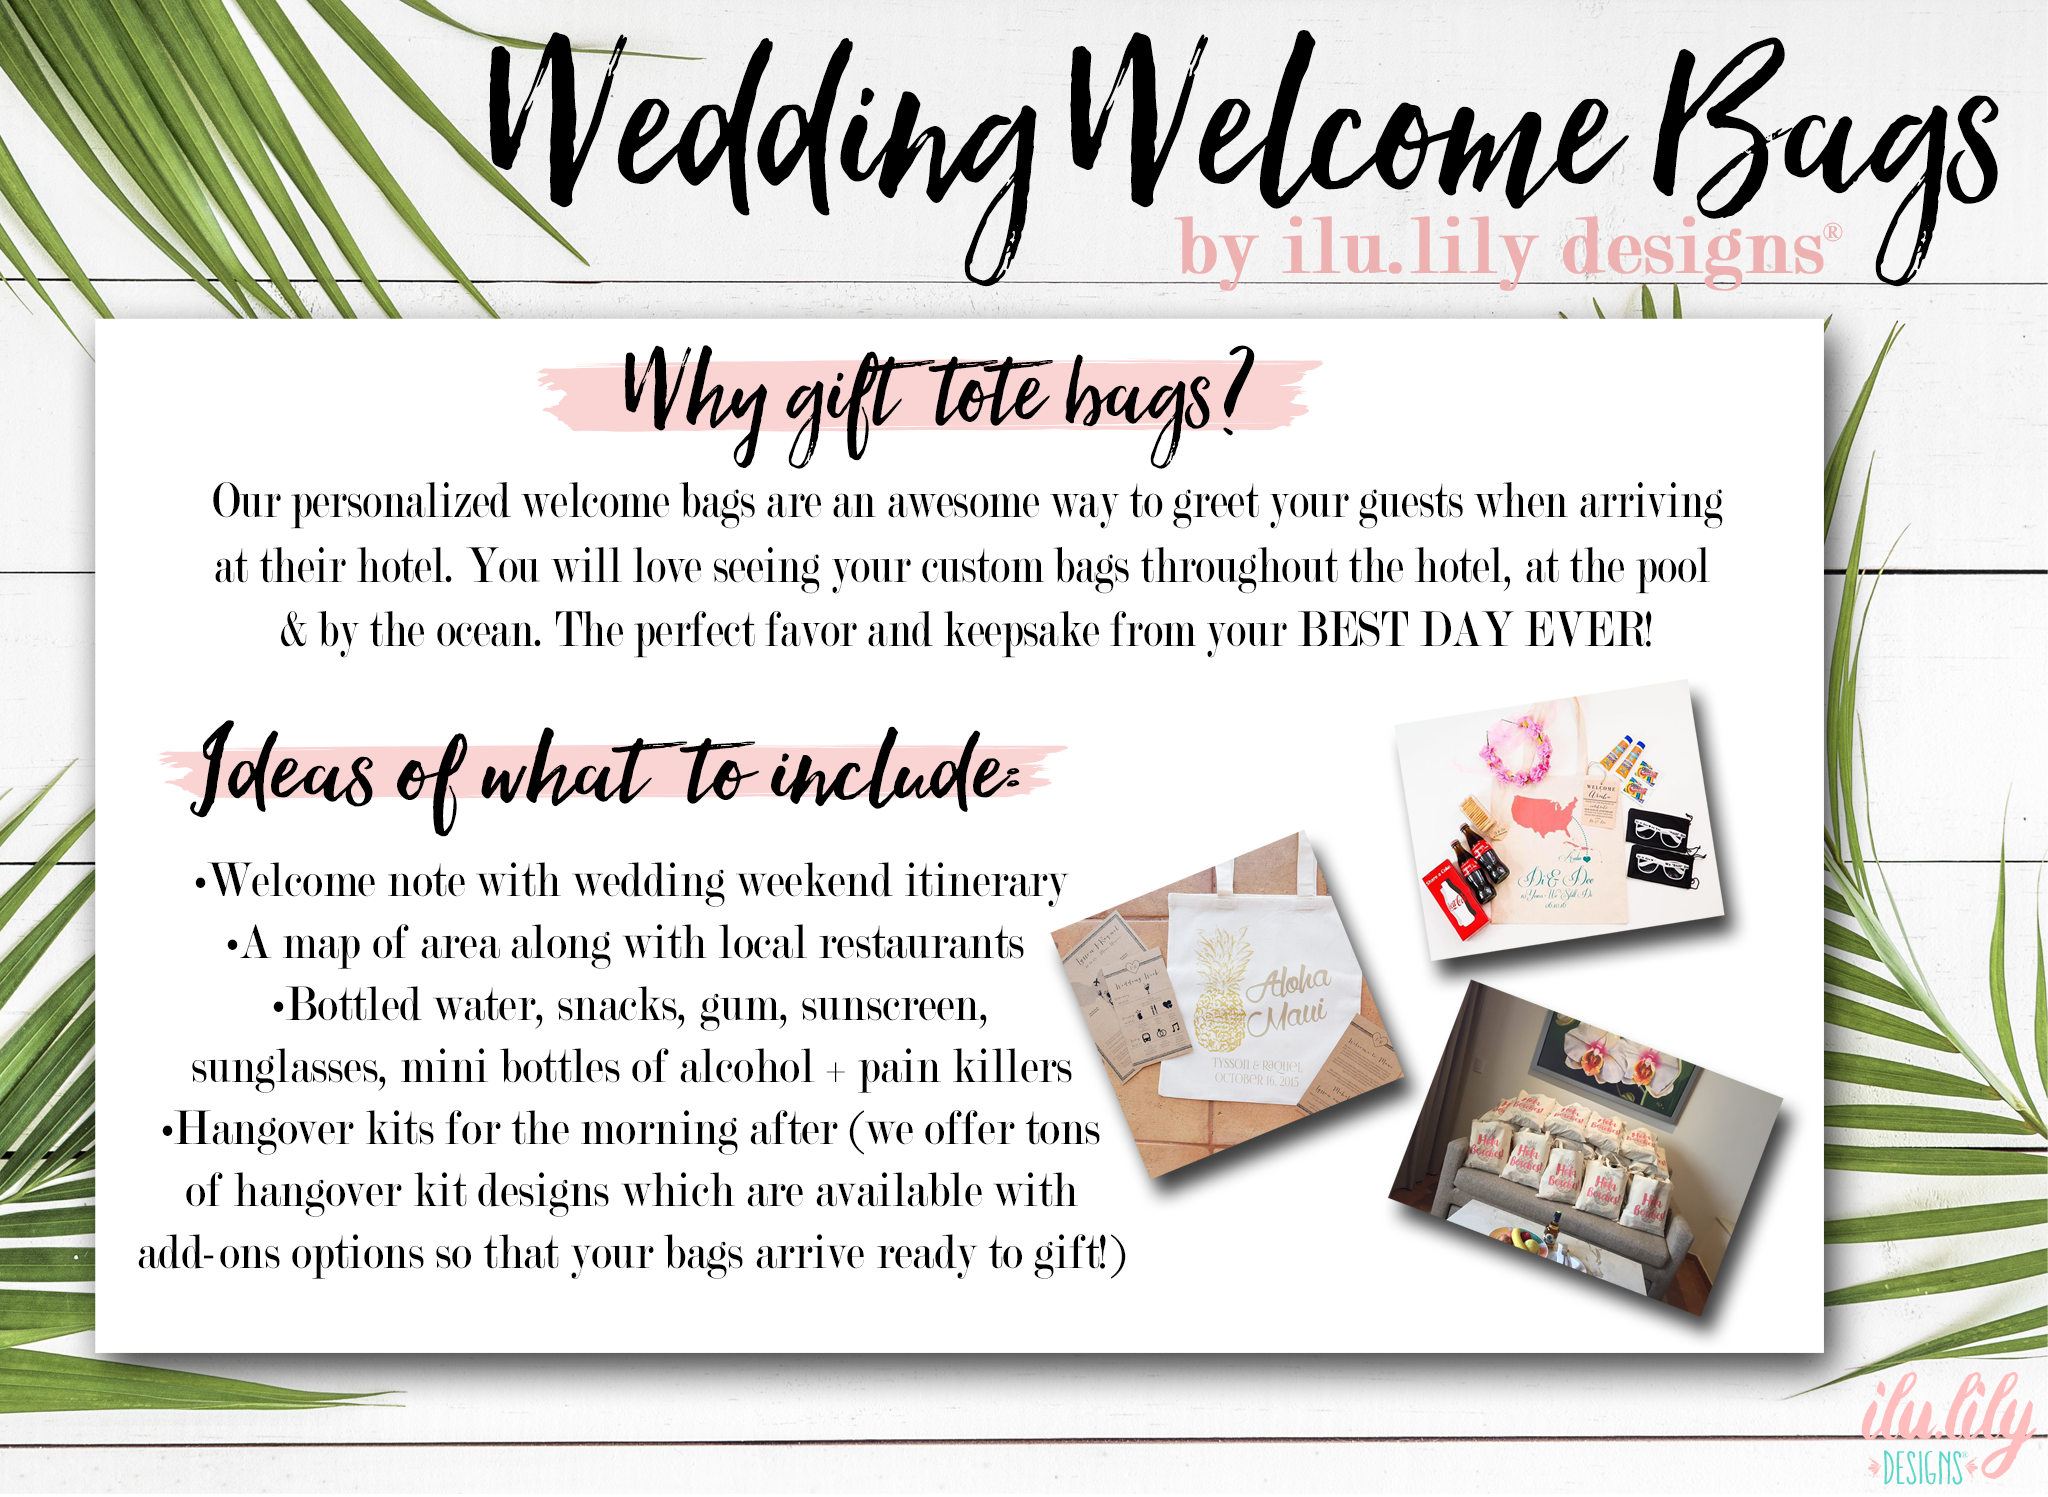 DESTINATION WEDDING CURATED WEDDING WELCOME GIFT